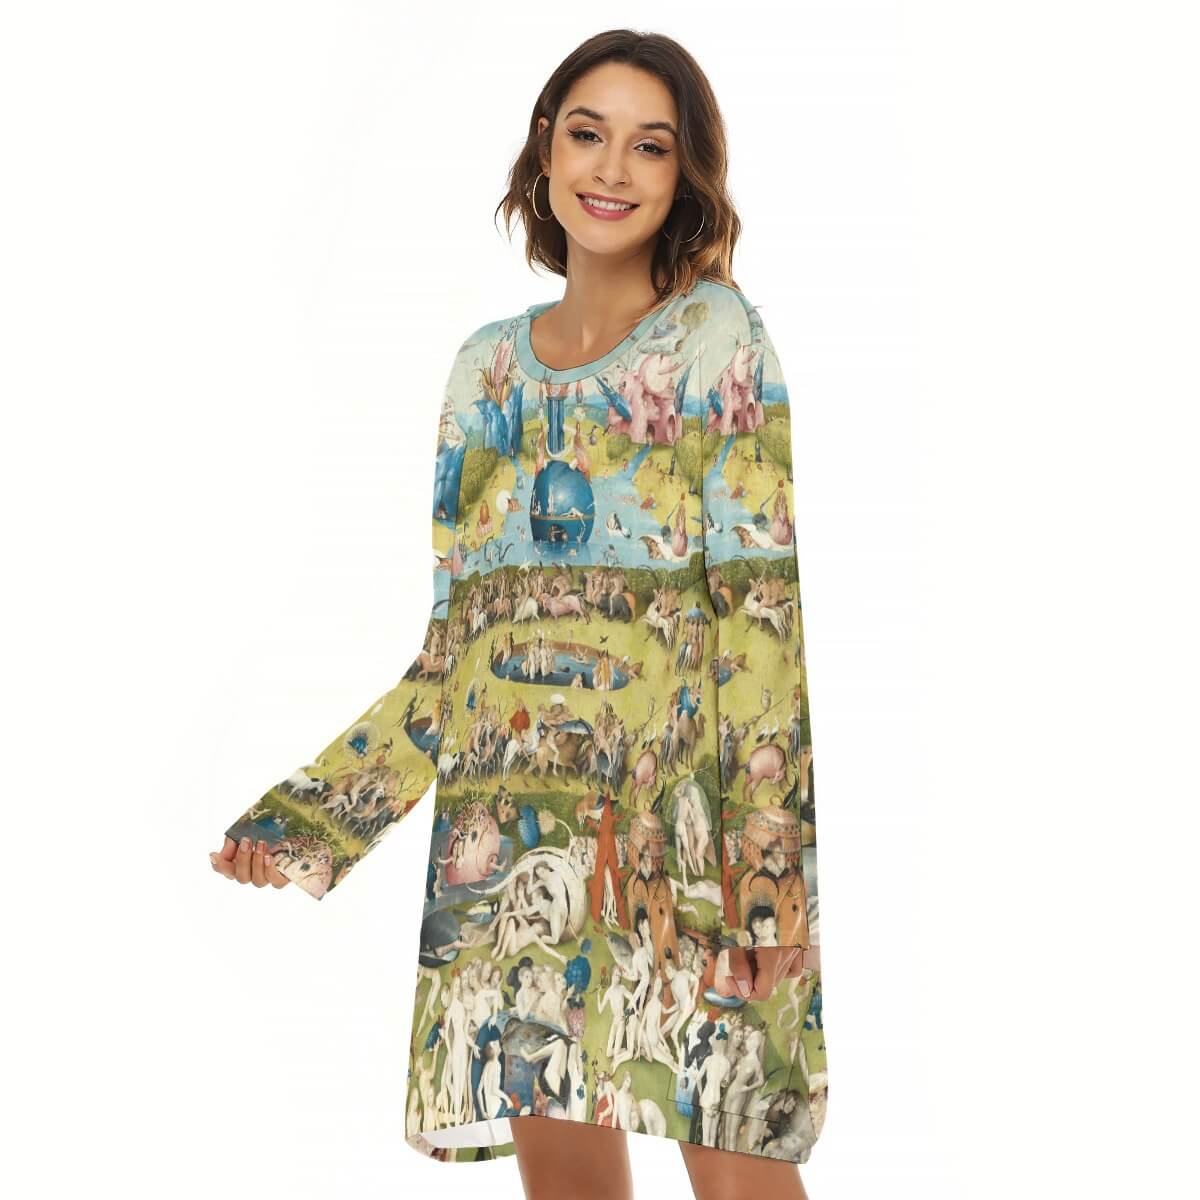 Loose Fit Dress with Surreal Artwork